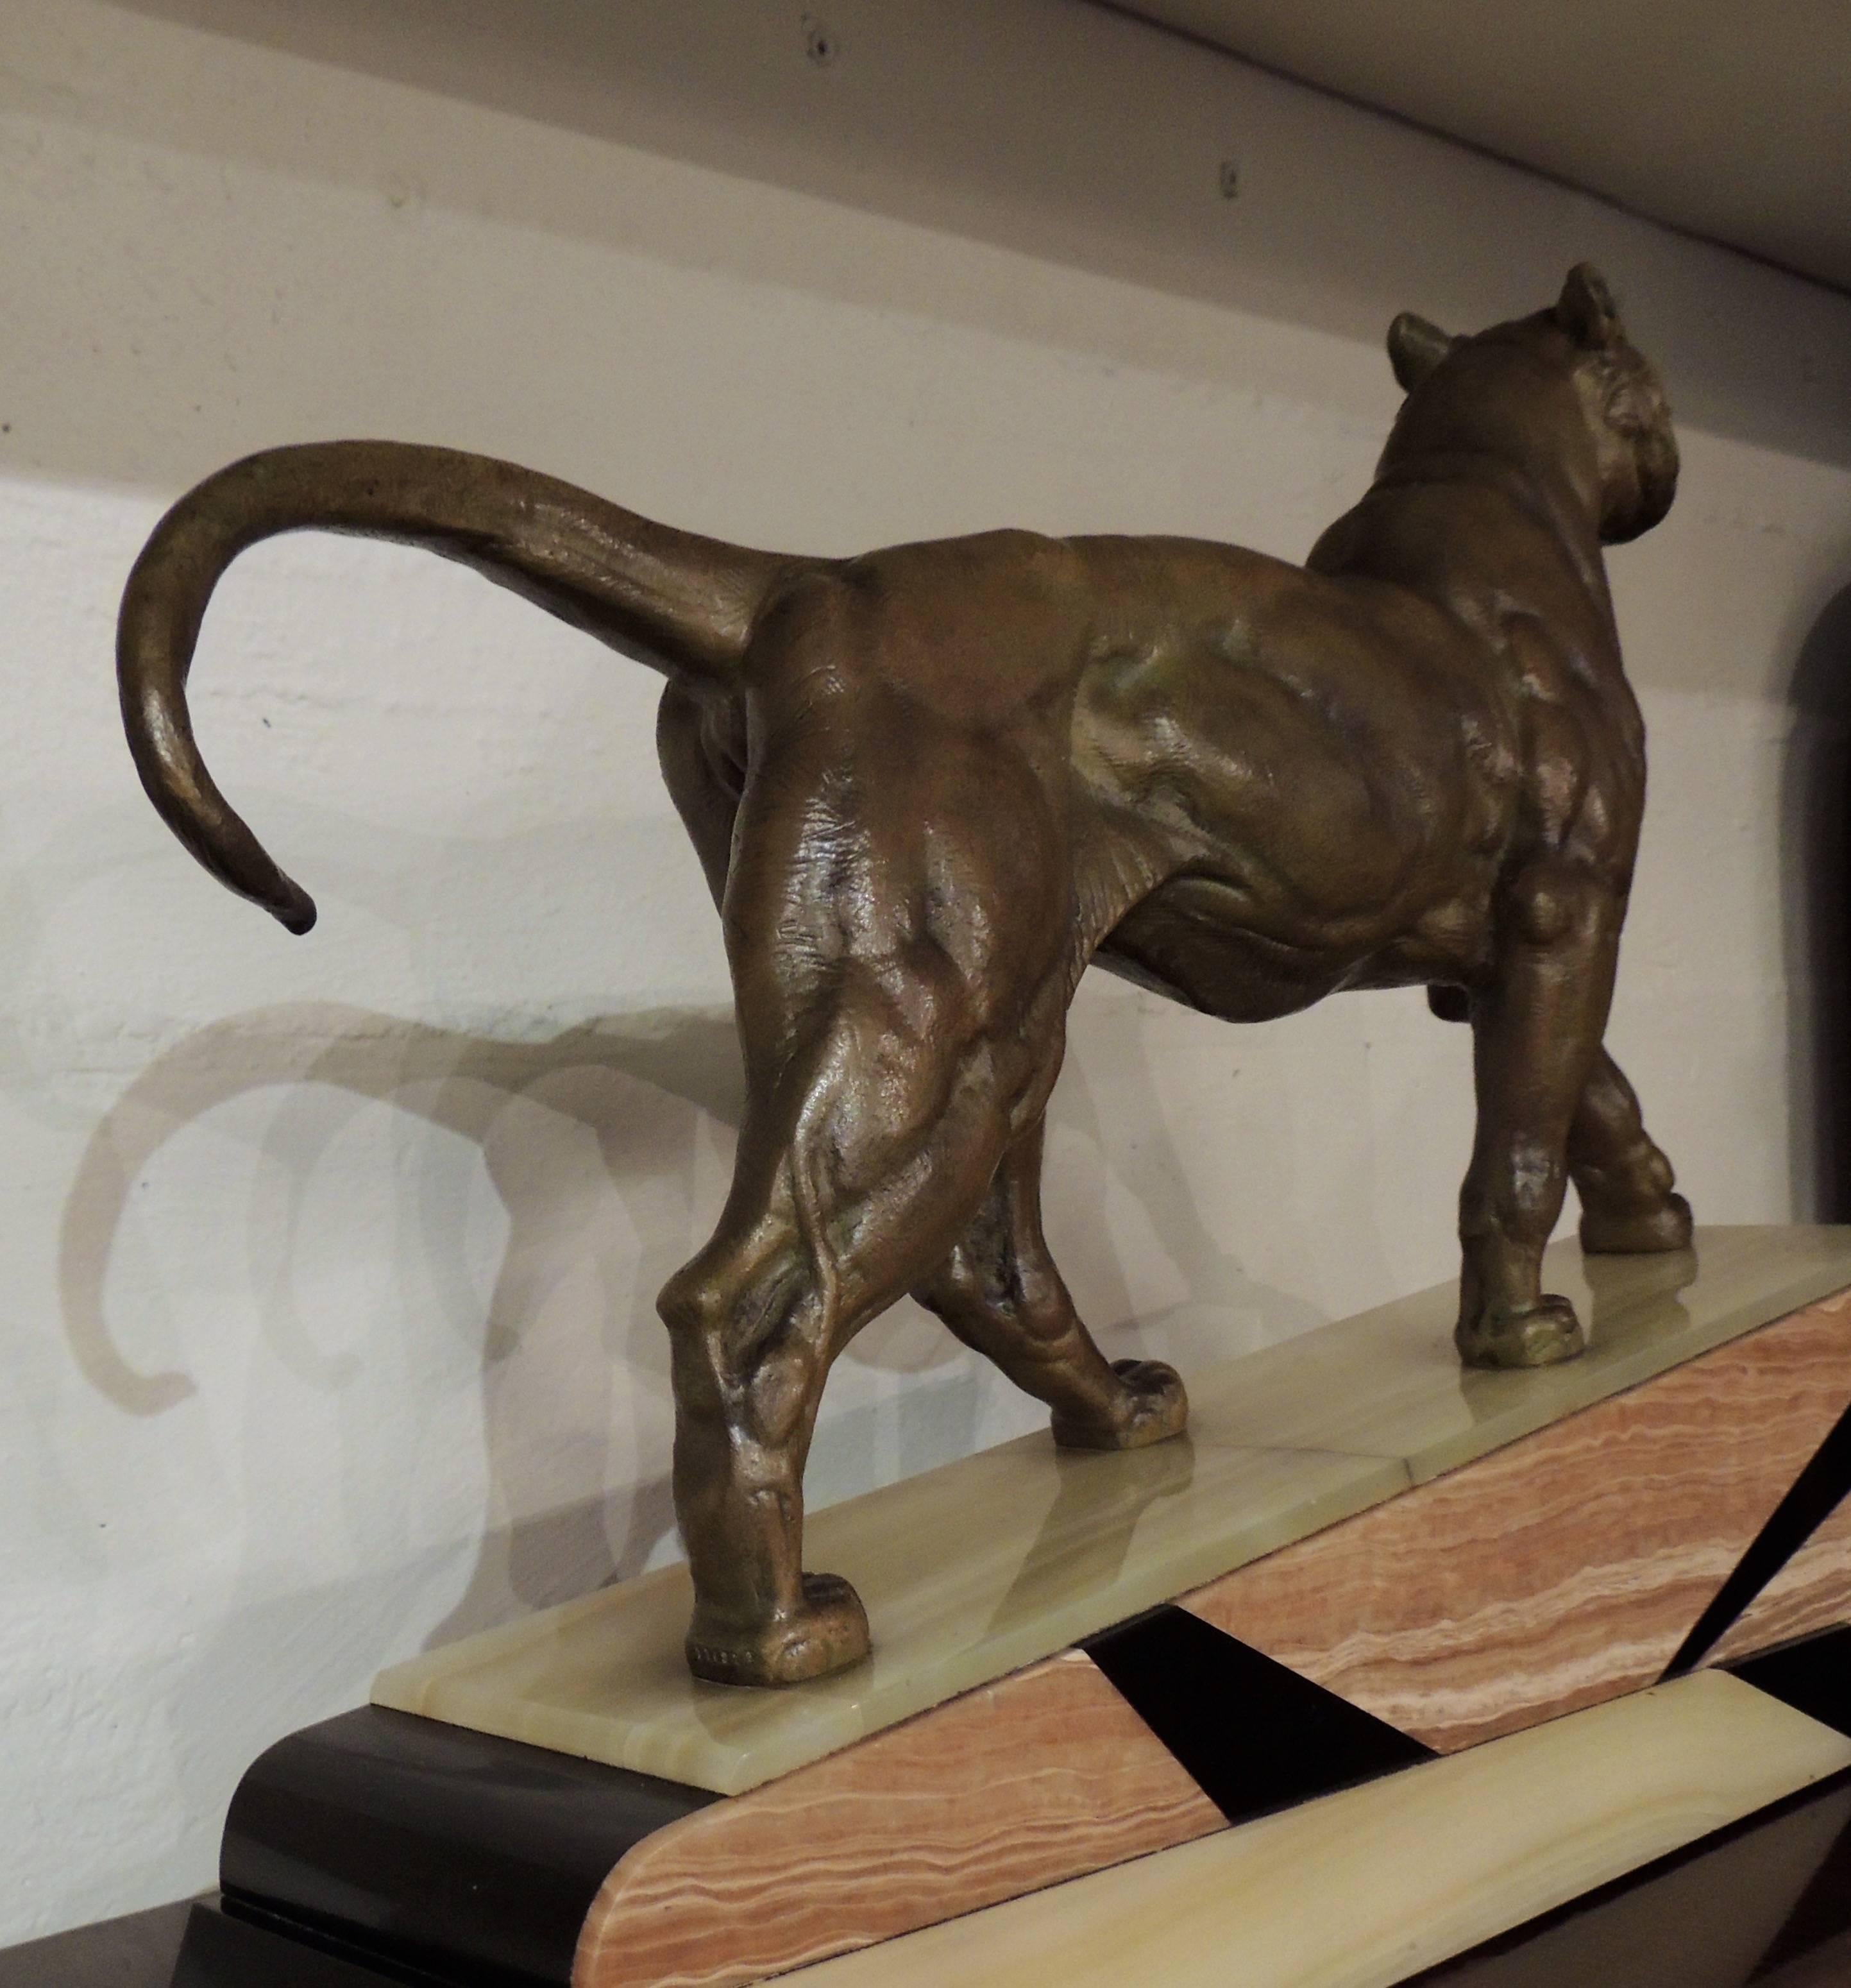 An Art Deco era bronze statue of a lion with a great marble base of three tones inlaid in geometric shapes. The lion is powerfully rendered, its expression and musculature well defined.

Throughout history, the Lion has been known as the “king of